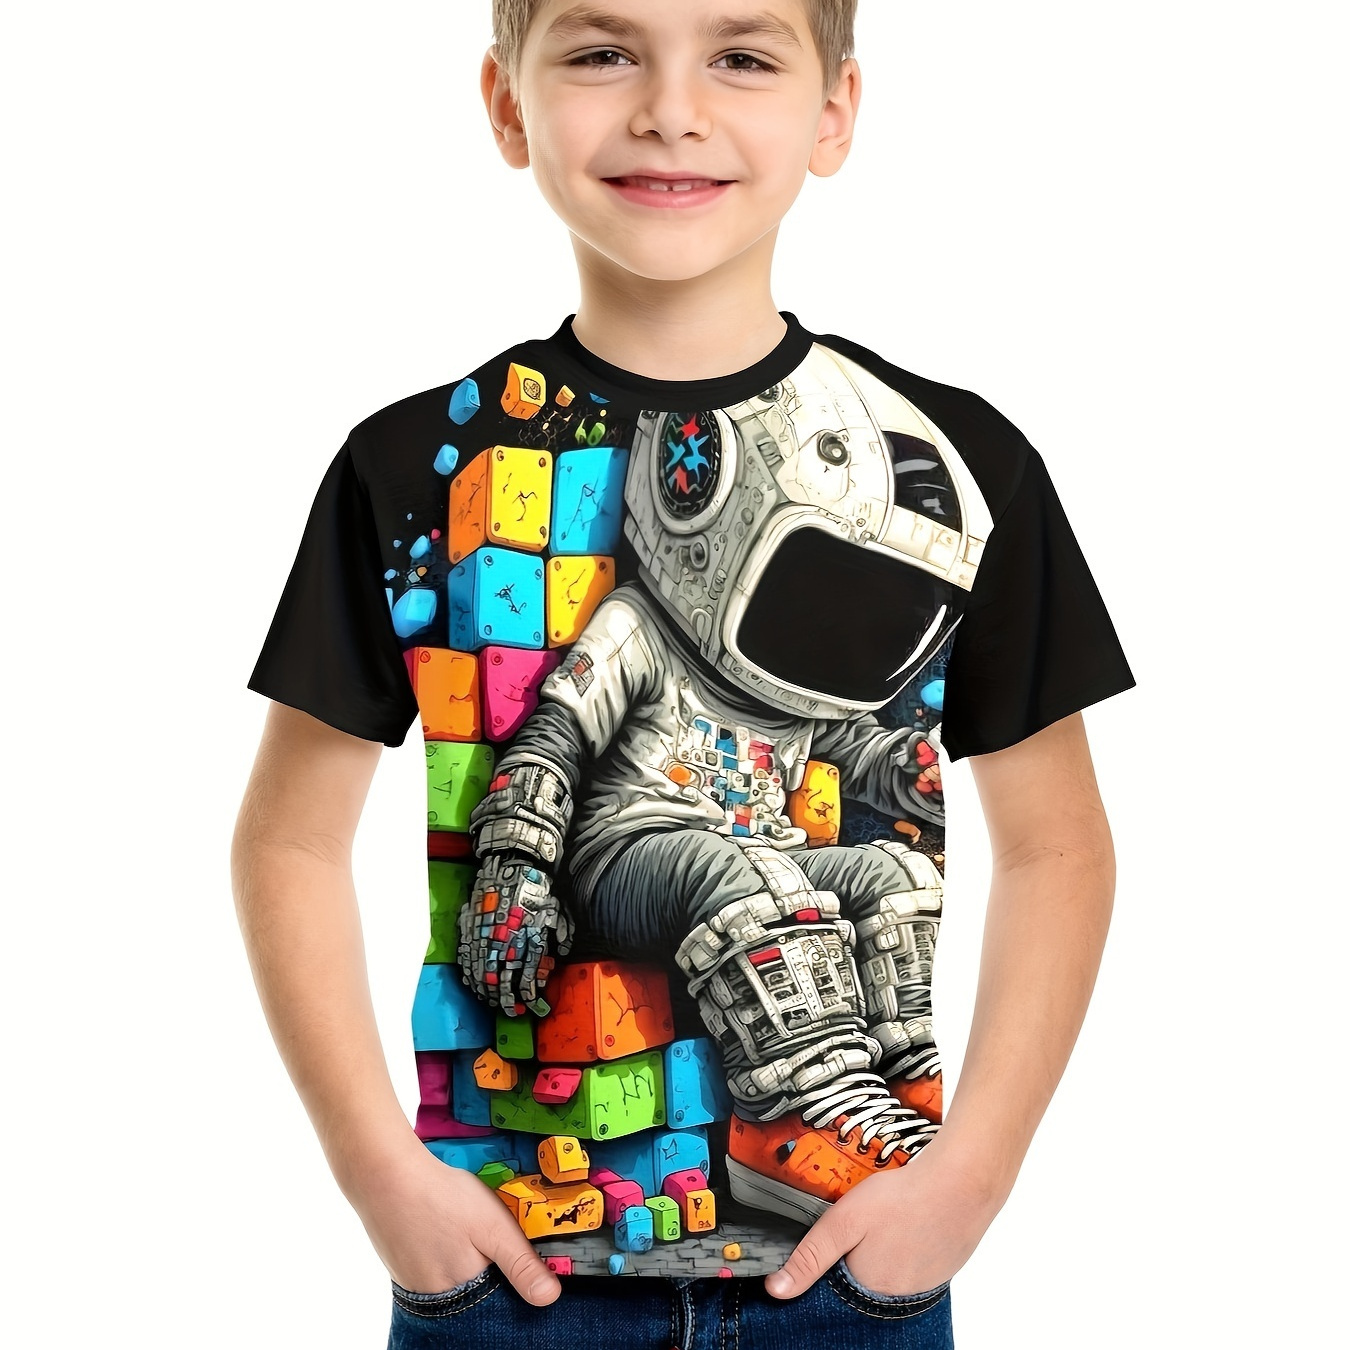 

Colorful Square And Astronaut Print Boy's Cute T-shirt, Kids Casual Short Sleeve Crew Neck Top Summer Daily Wear